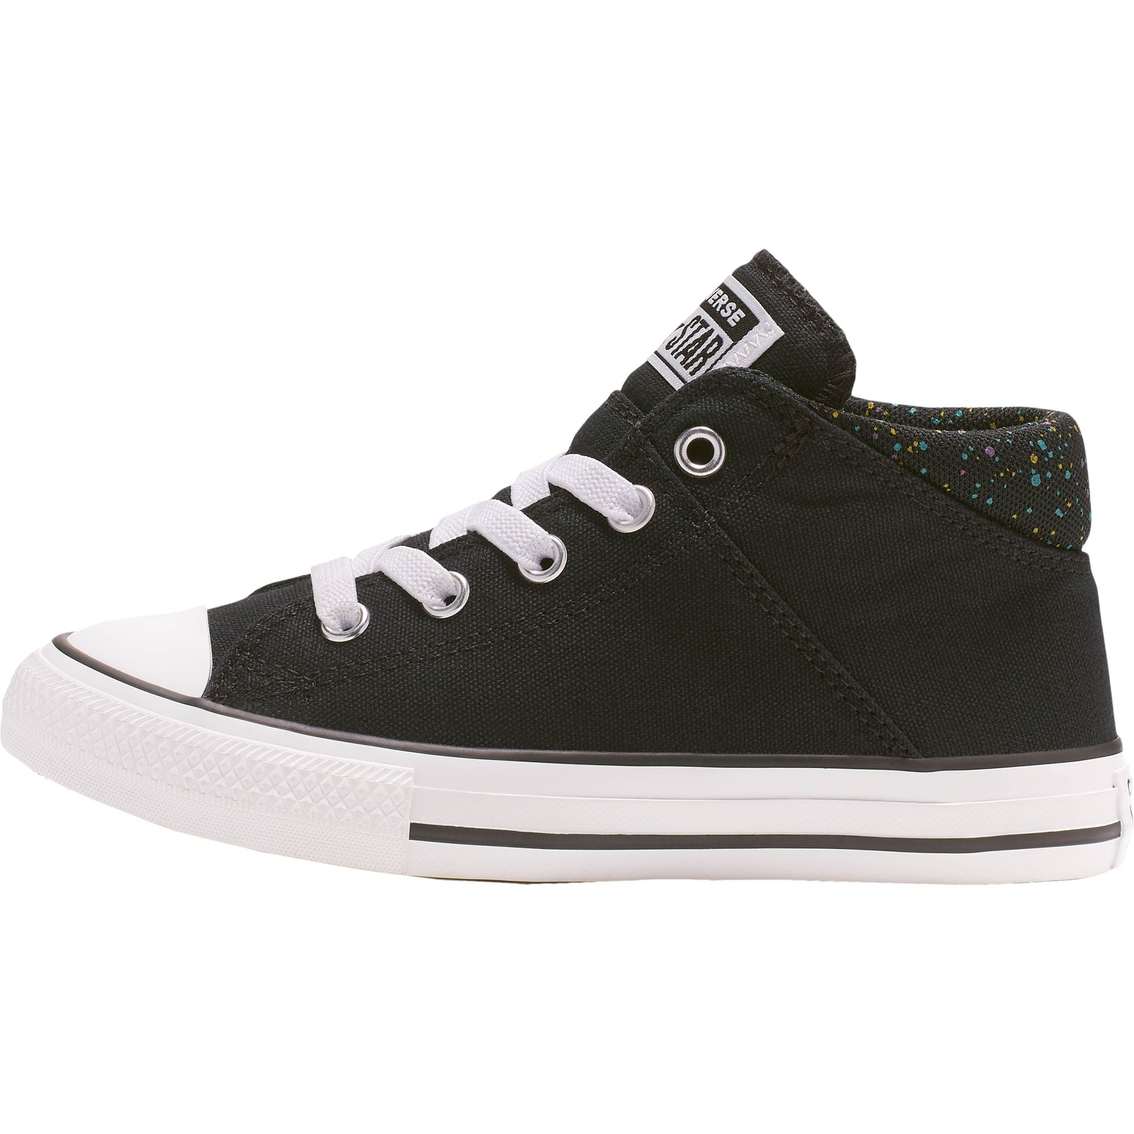 Converse Girls Chuck Taylor All Stars Madison Mid GG Shoes - Image 3 of 3